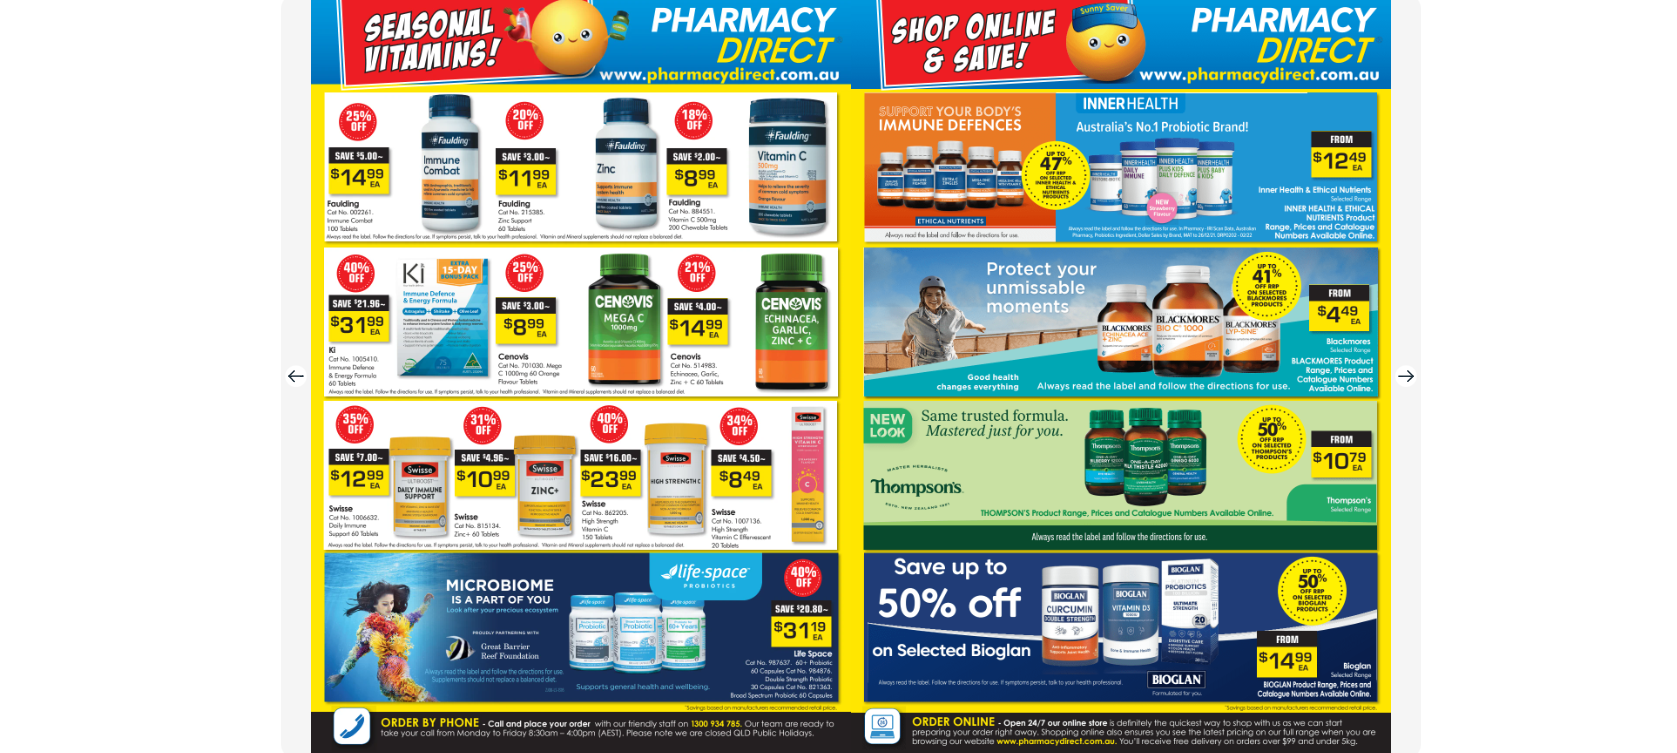 Pharmacy Direct  Spring saving catalogue Up to 50% OFF on vitamins, supplements & more